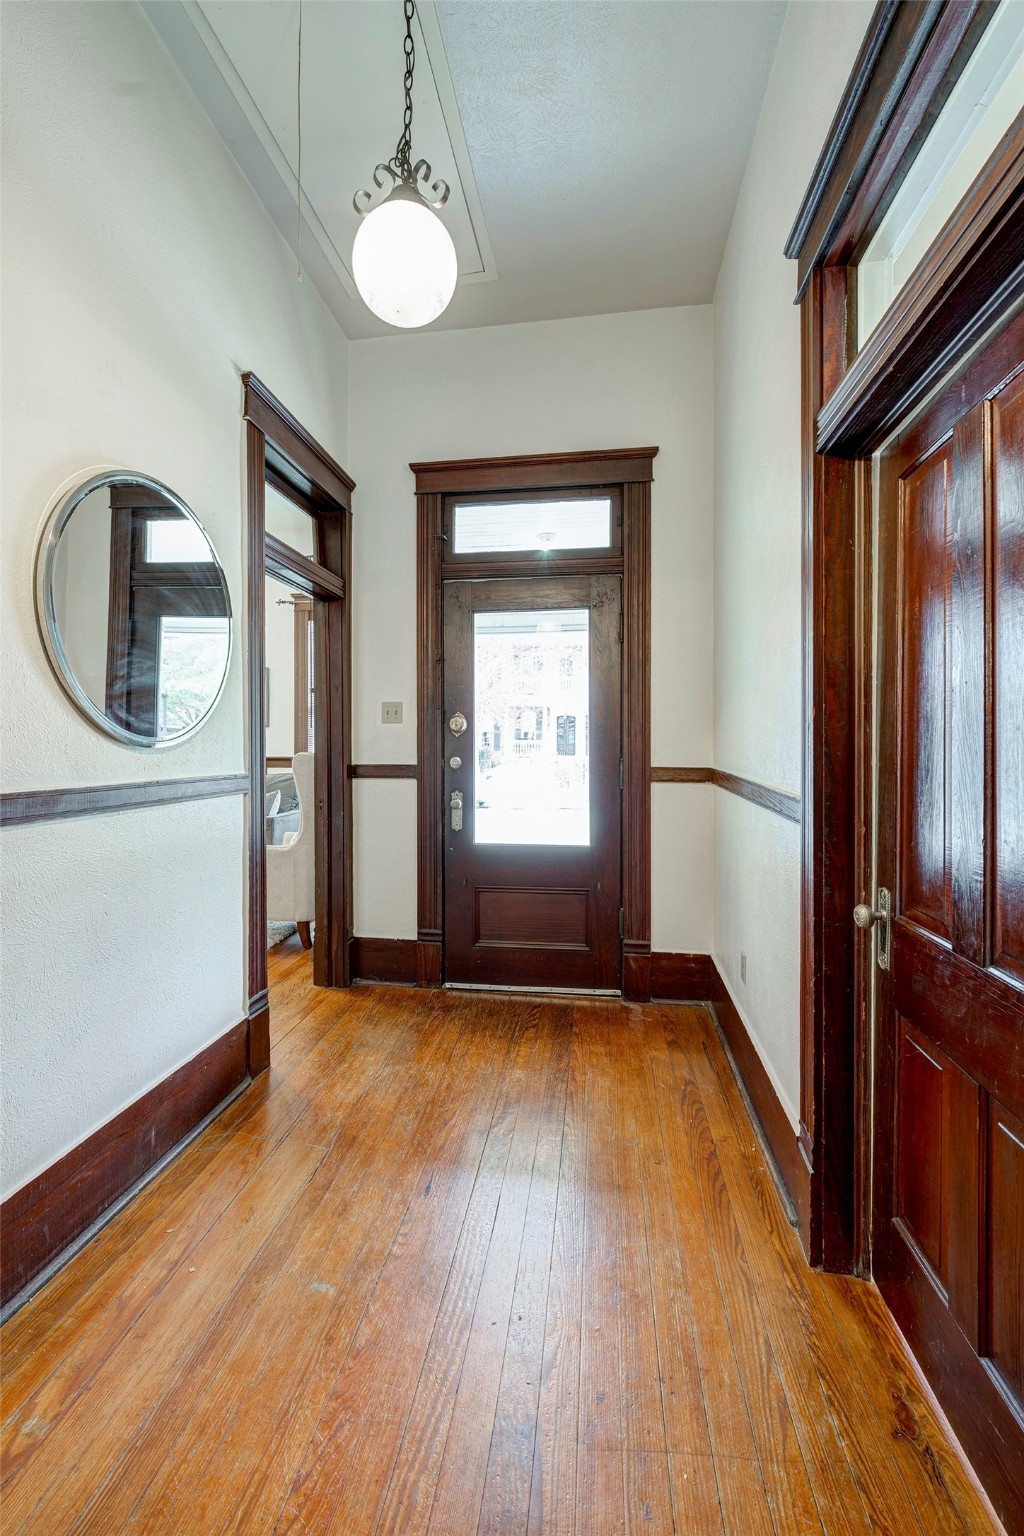 Grand foyer entryway with original heart of pine floors and 11 foot+ ceilings.